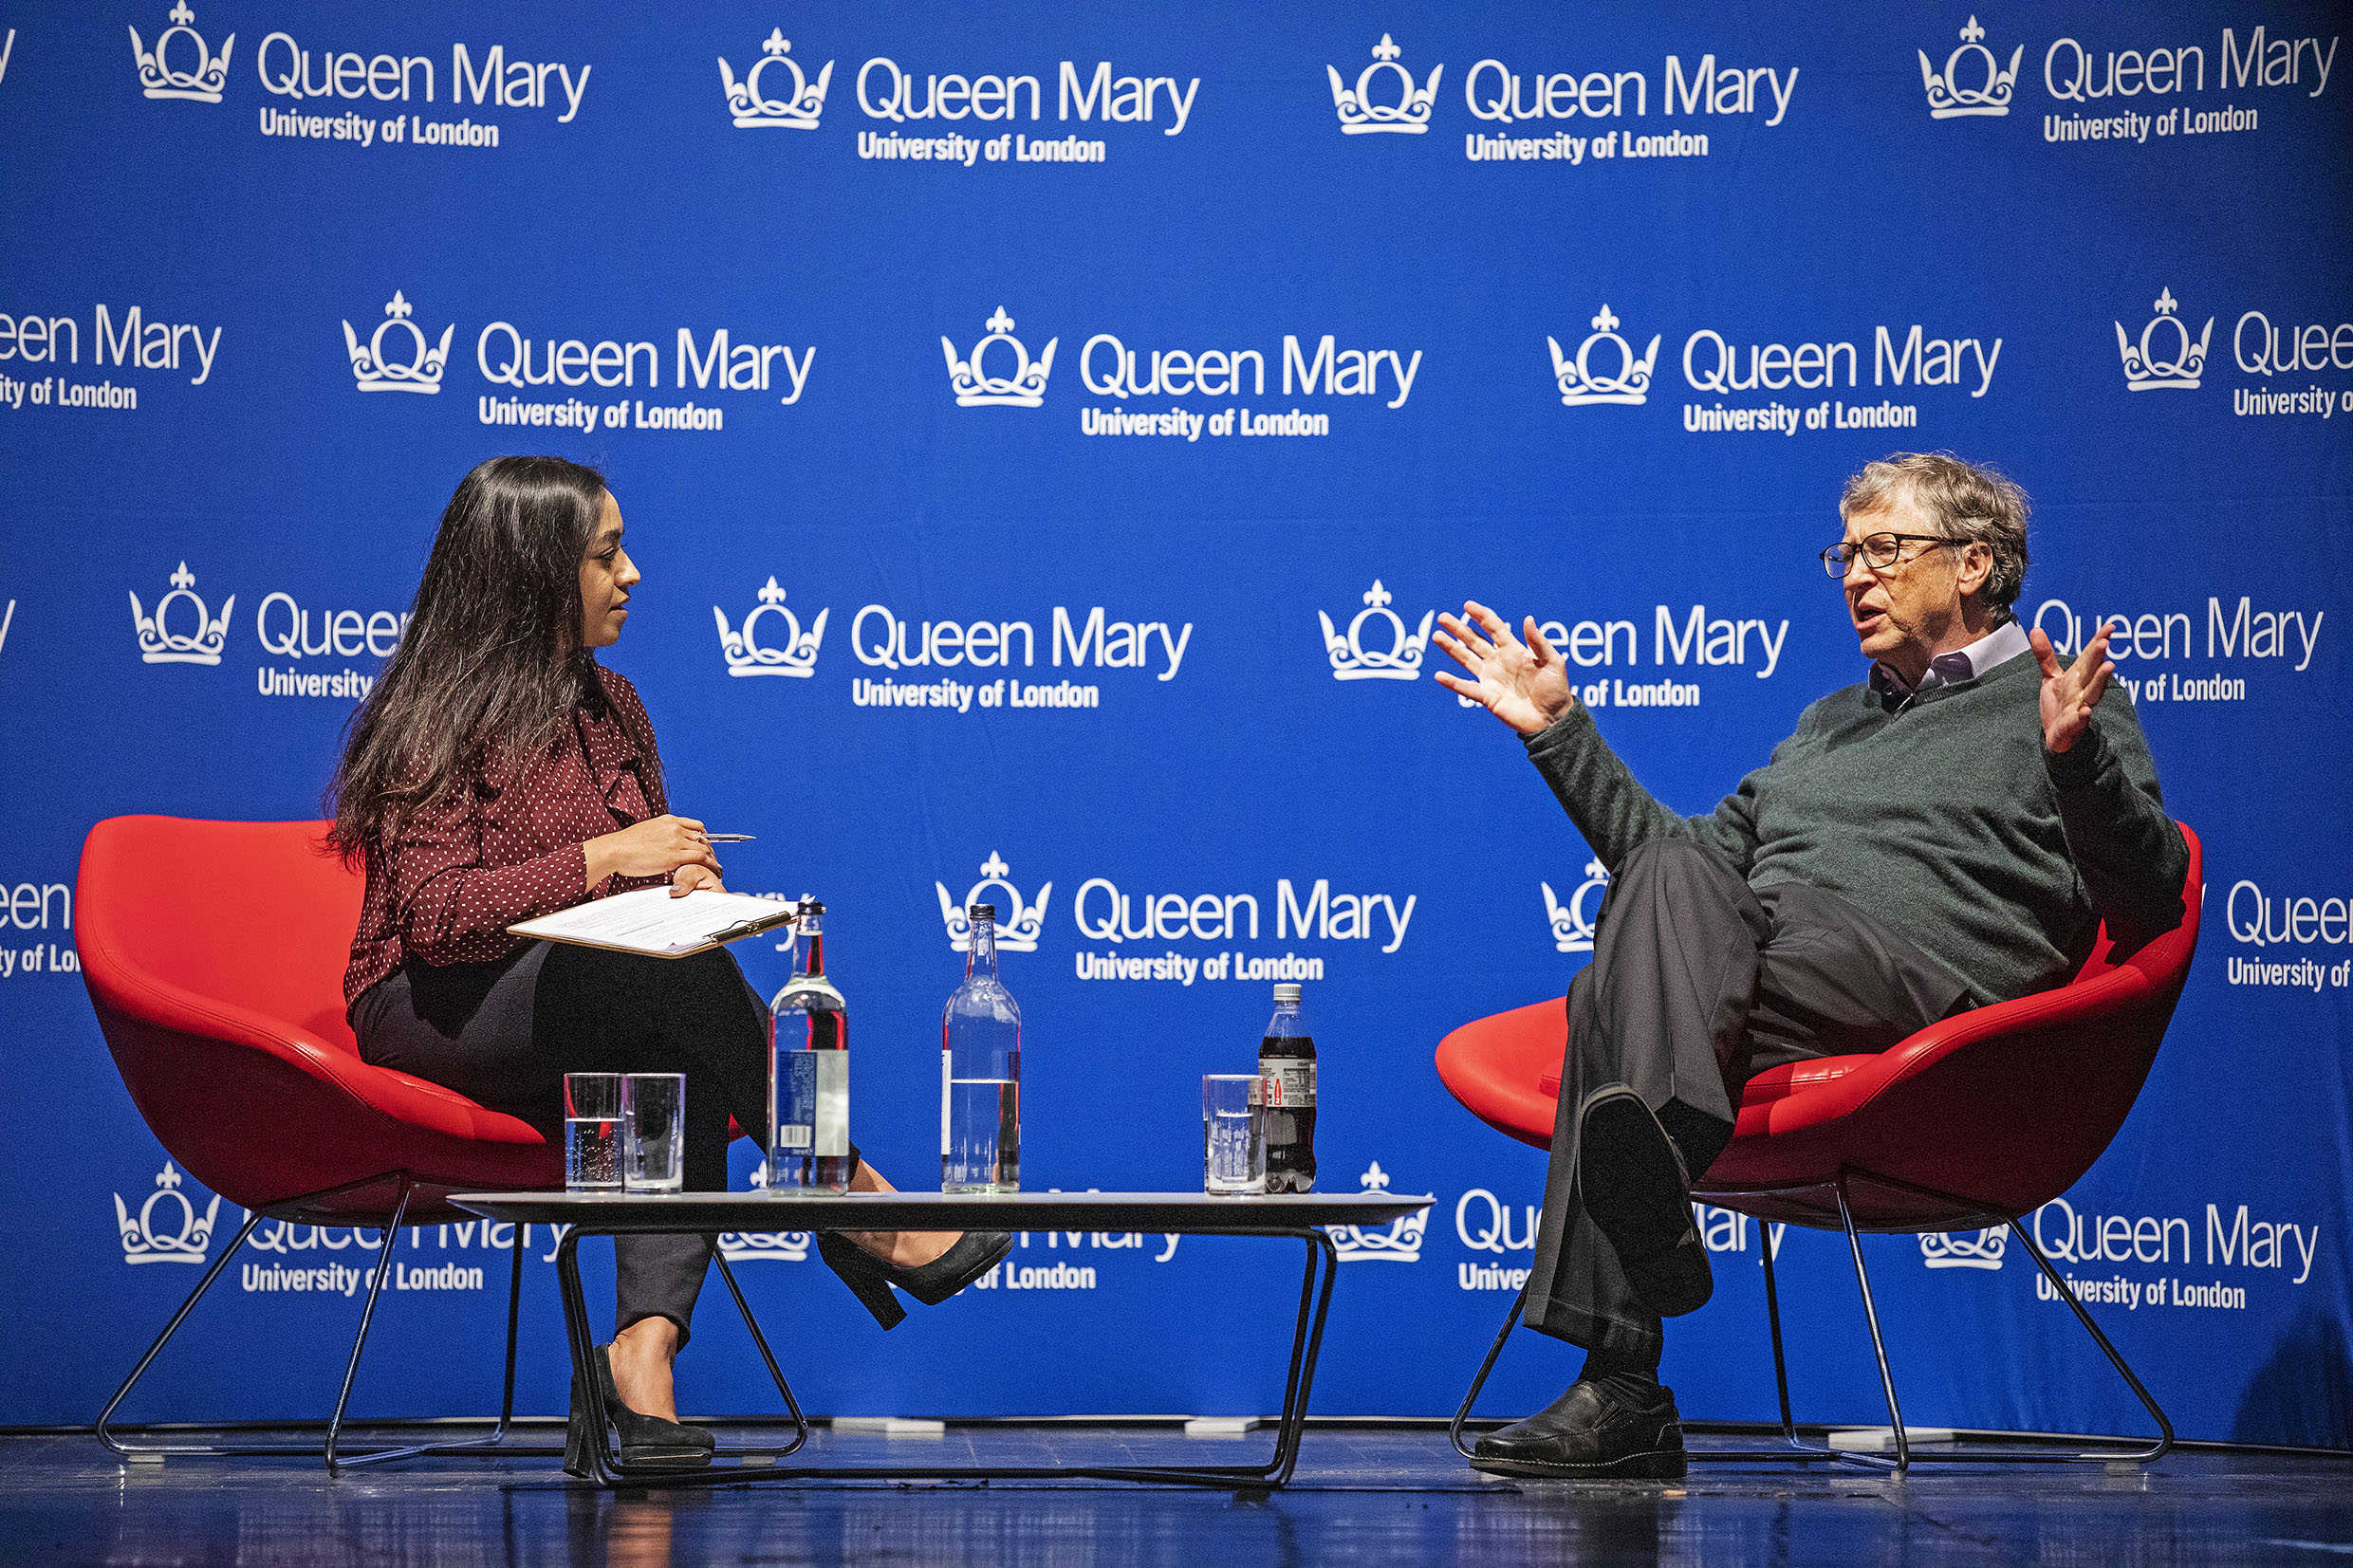 Bill gates being interviewed at a Queen Mary event 